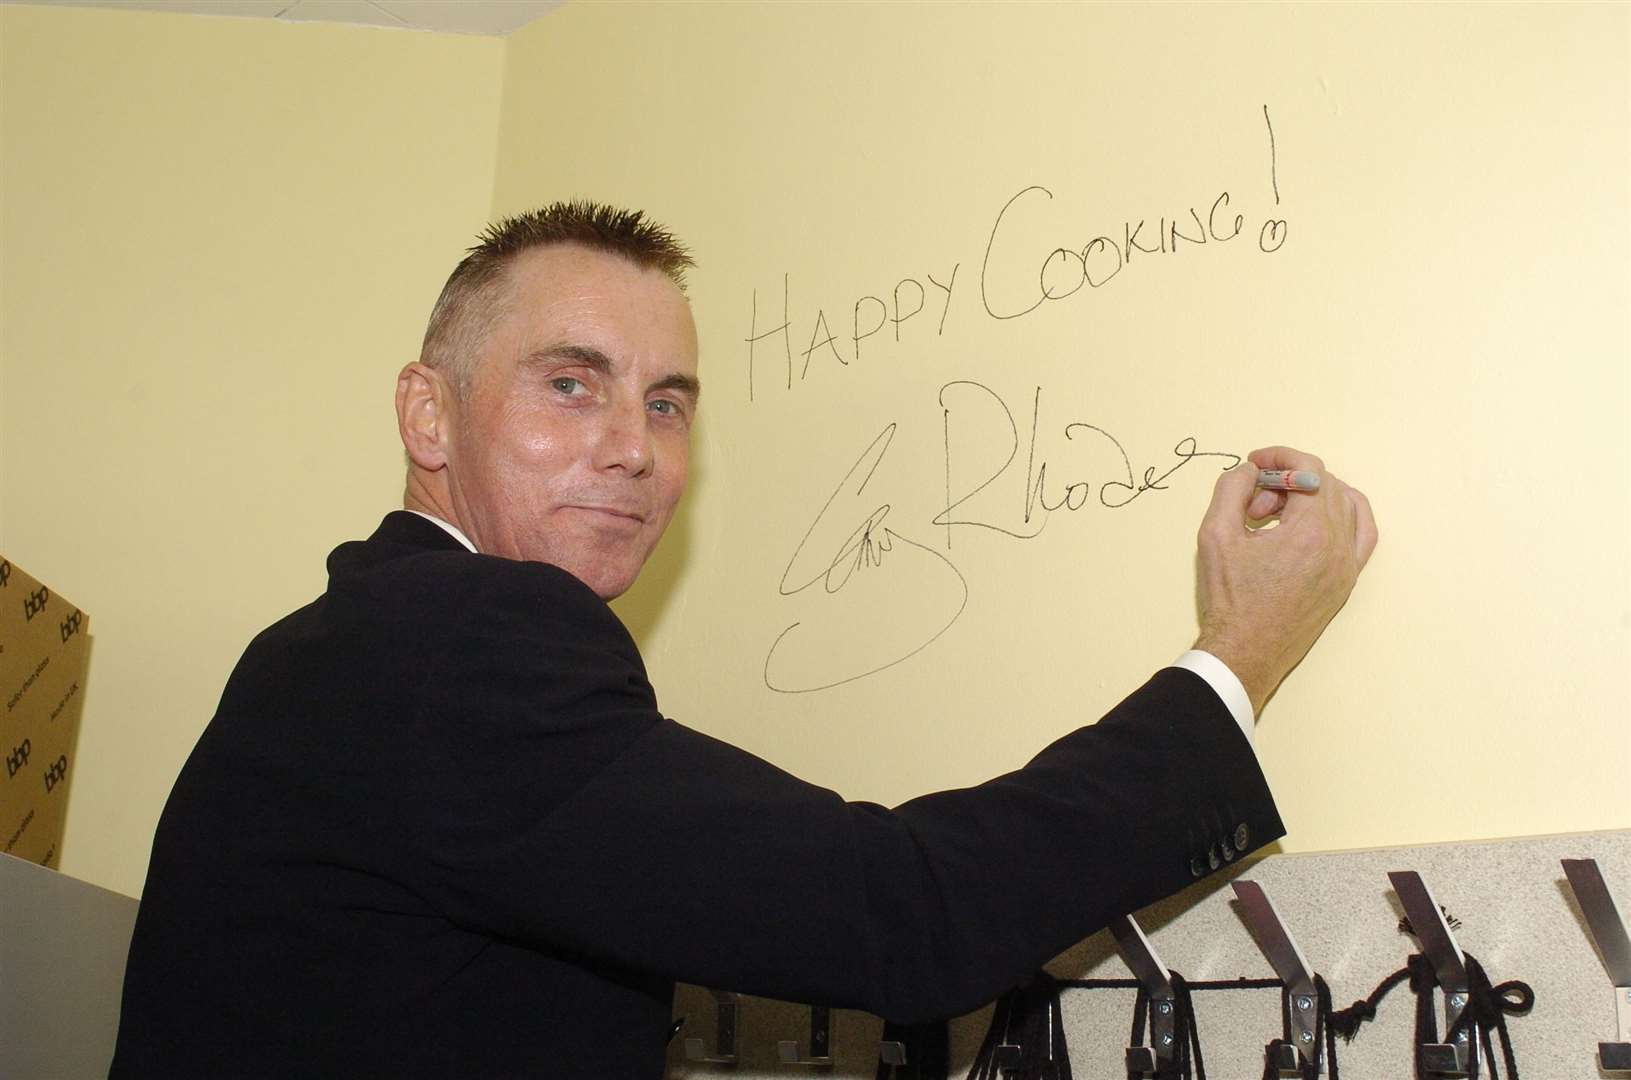 Gary Rhodes also opened a new cookery room at Rochester Grammar School in 2011